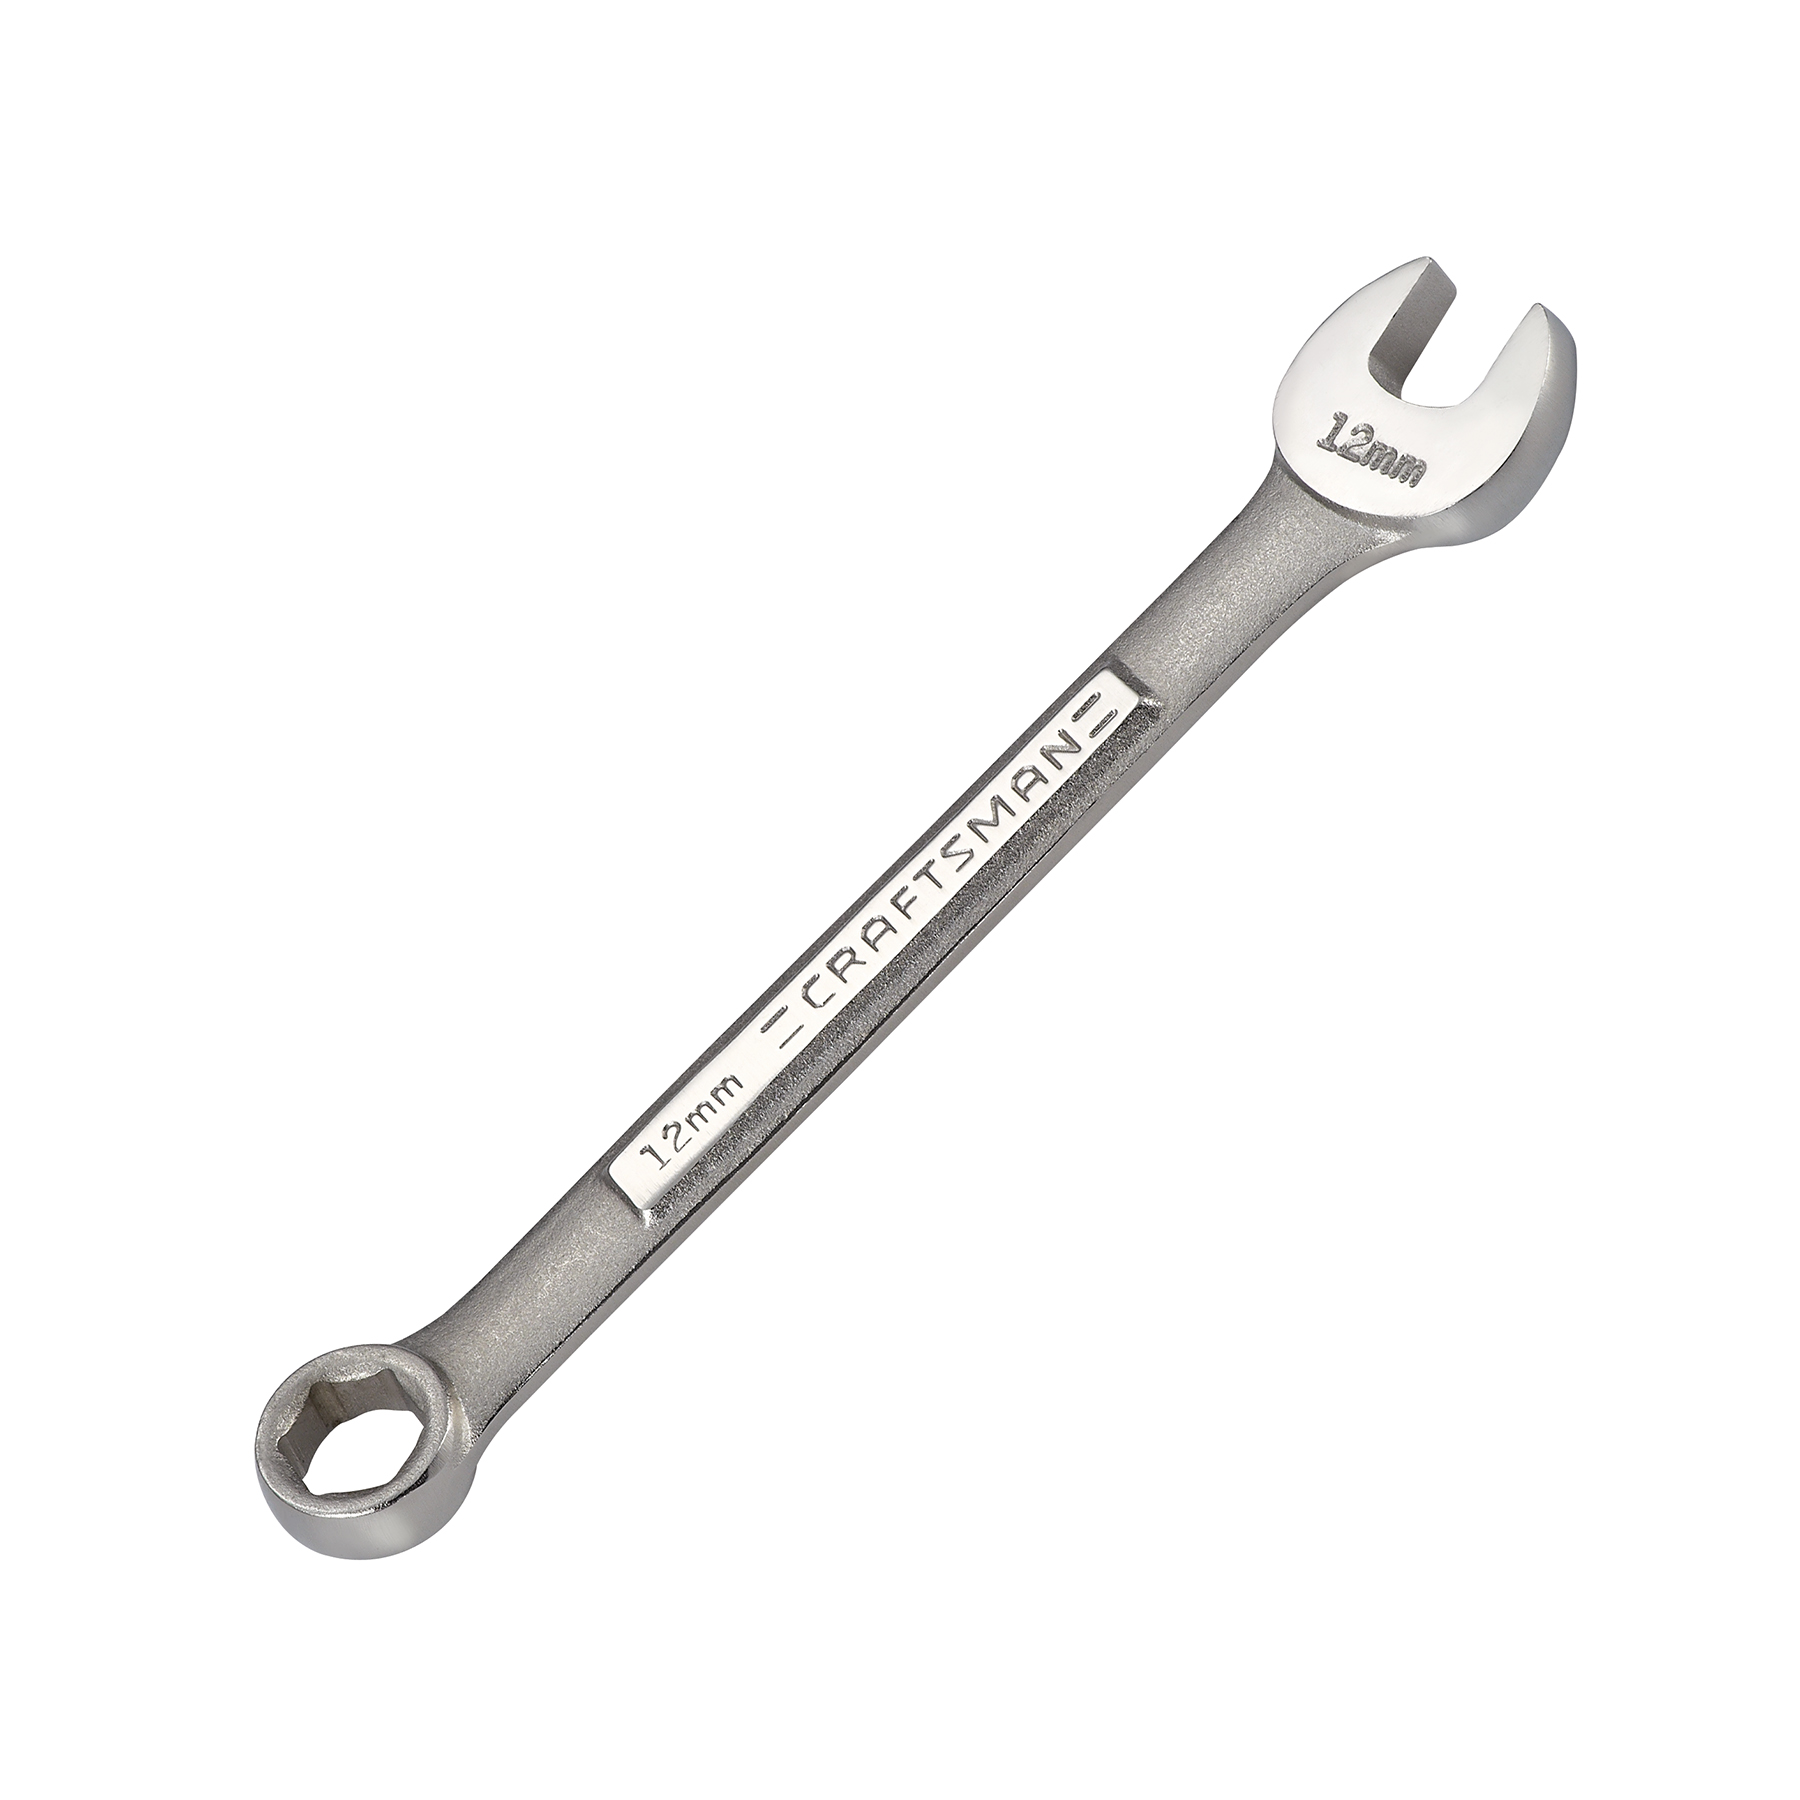 Craftsman 12mm 6 Point Combination Wrench